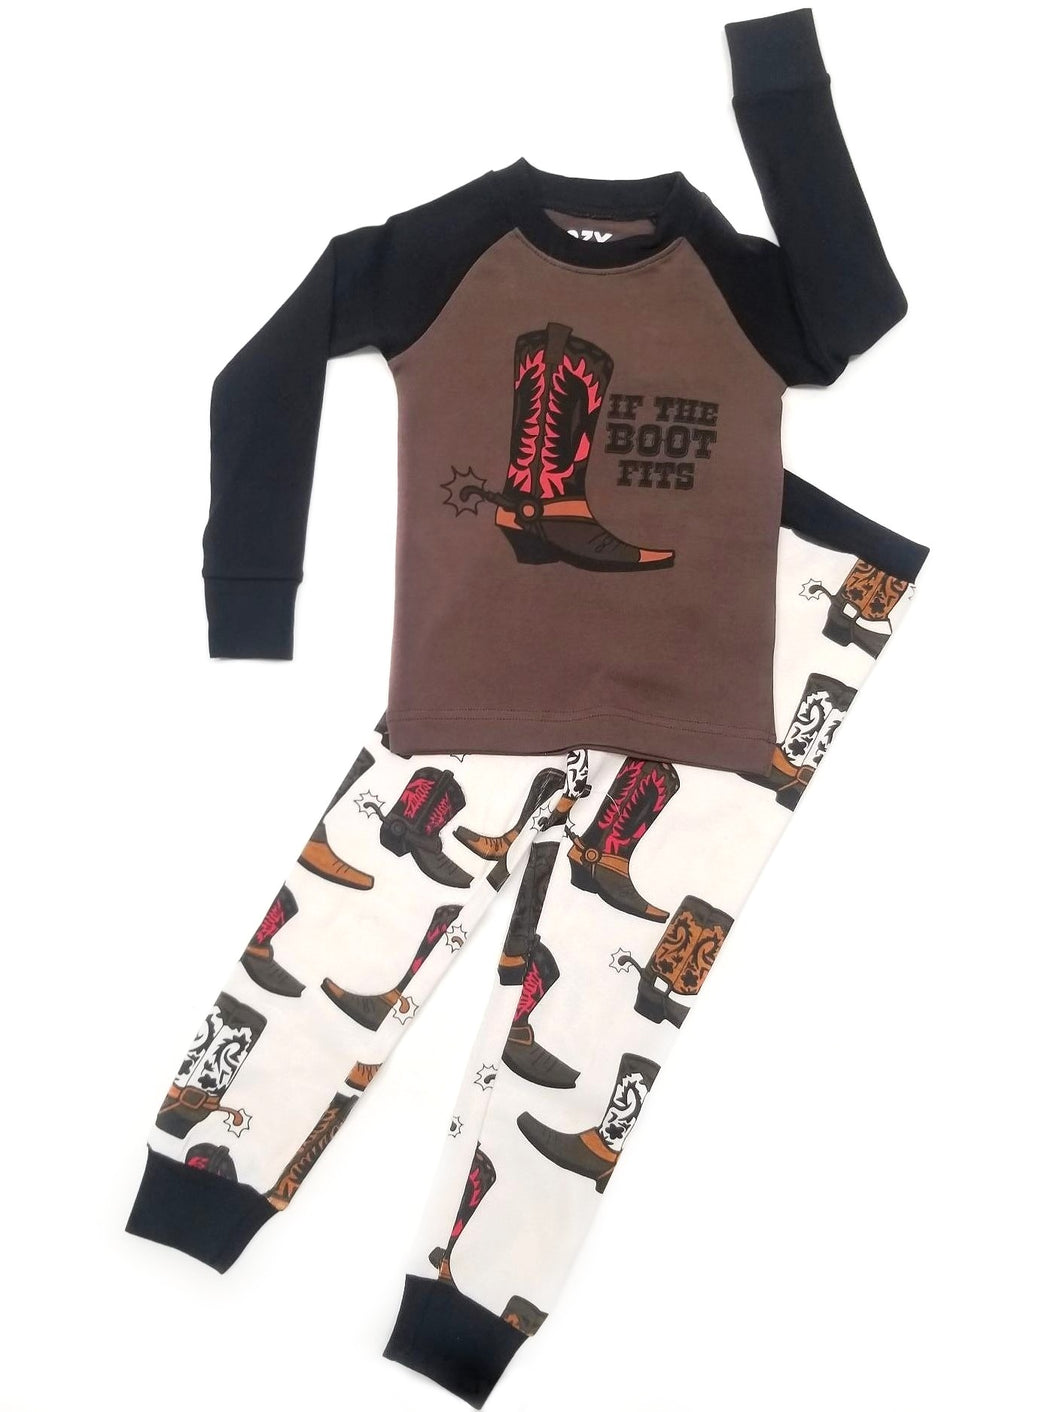 If The Boot Fits Boy Toddler PJ Set